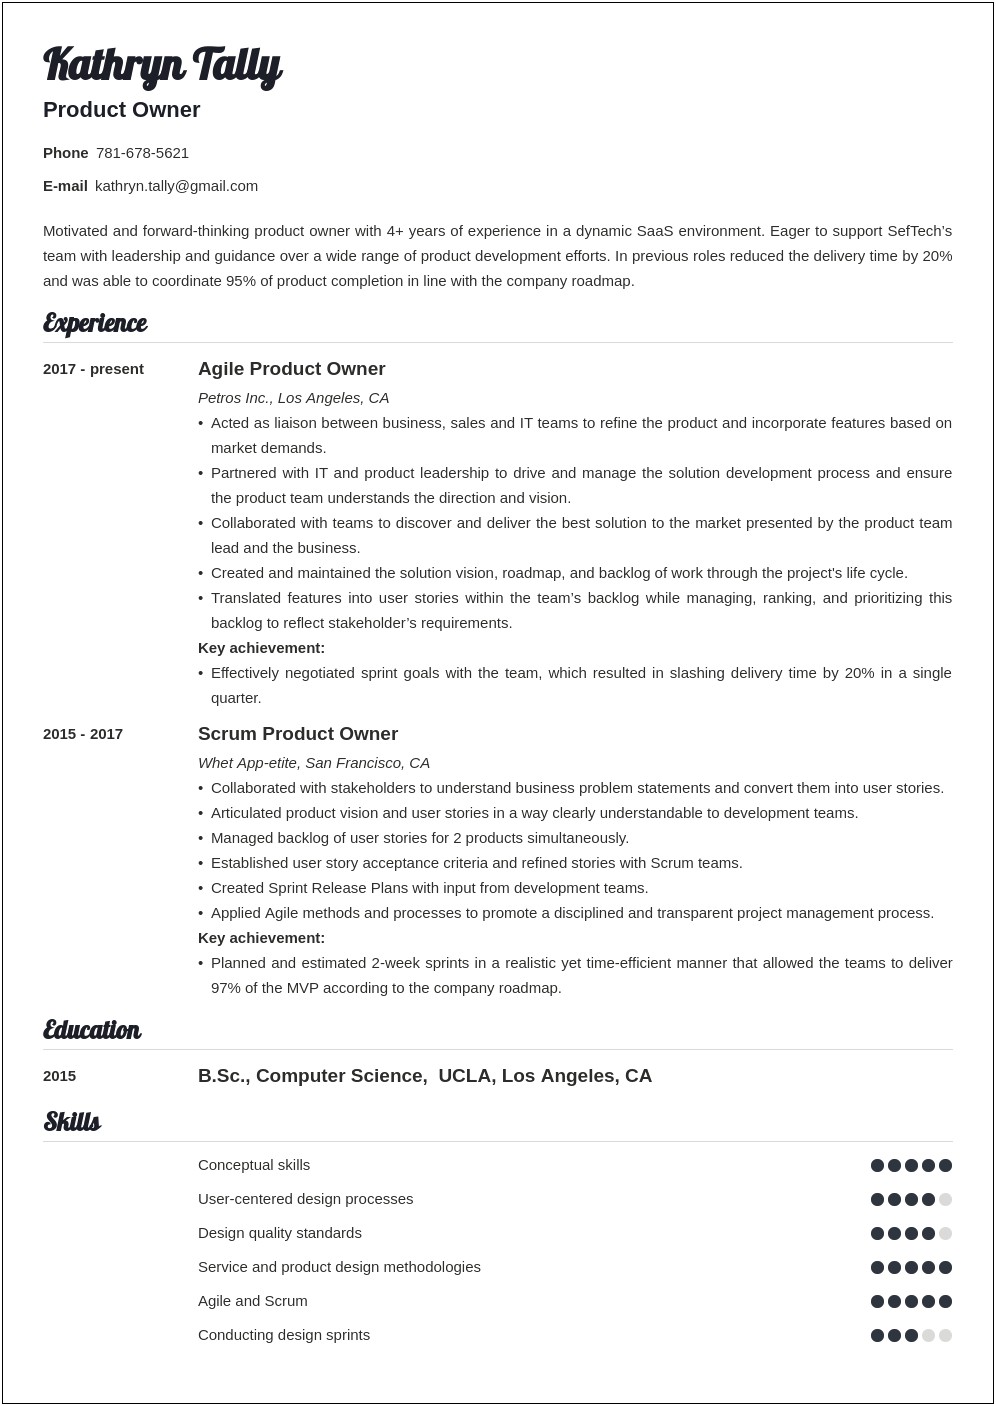 Agile Environment Product Owner Resume Template